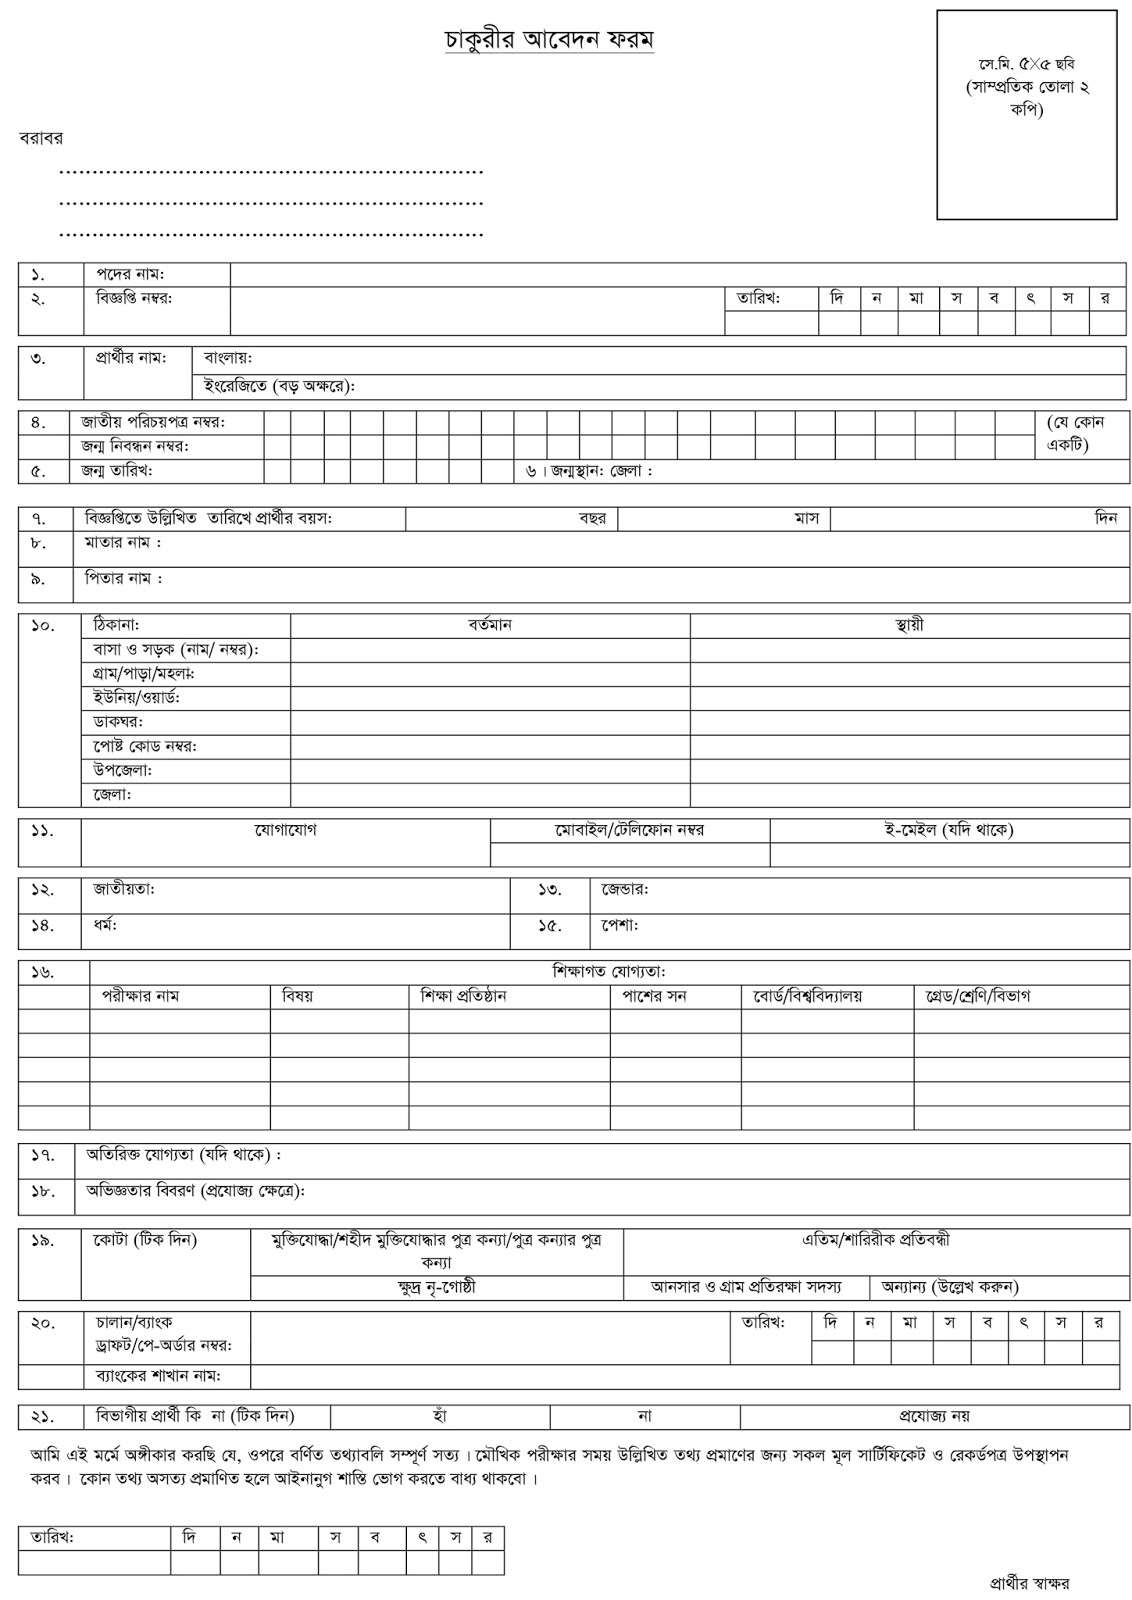 Institute of livestock Science and Technology Application form